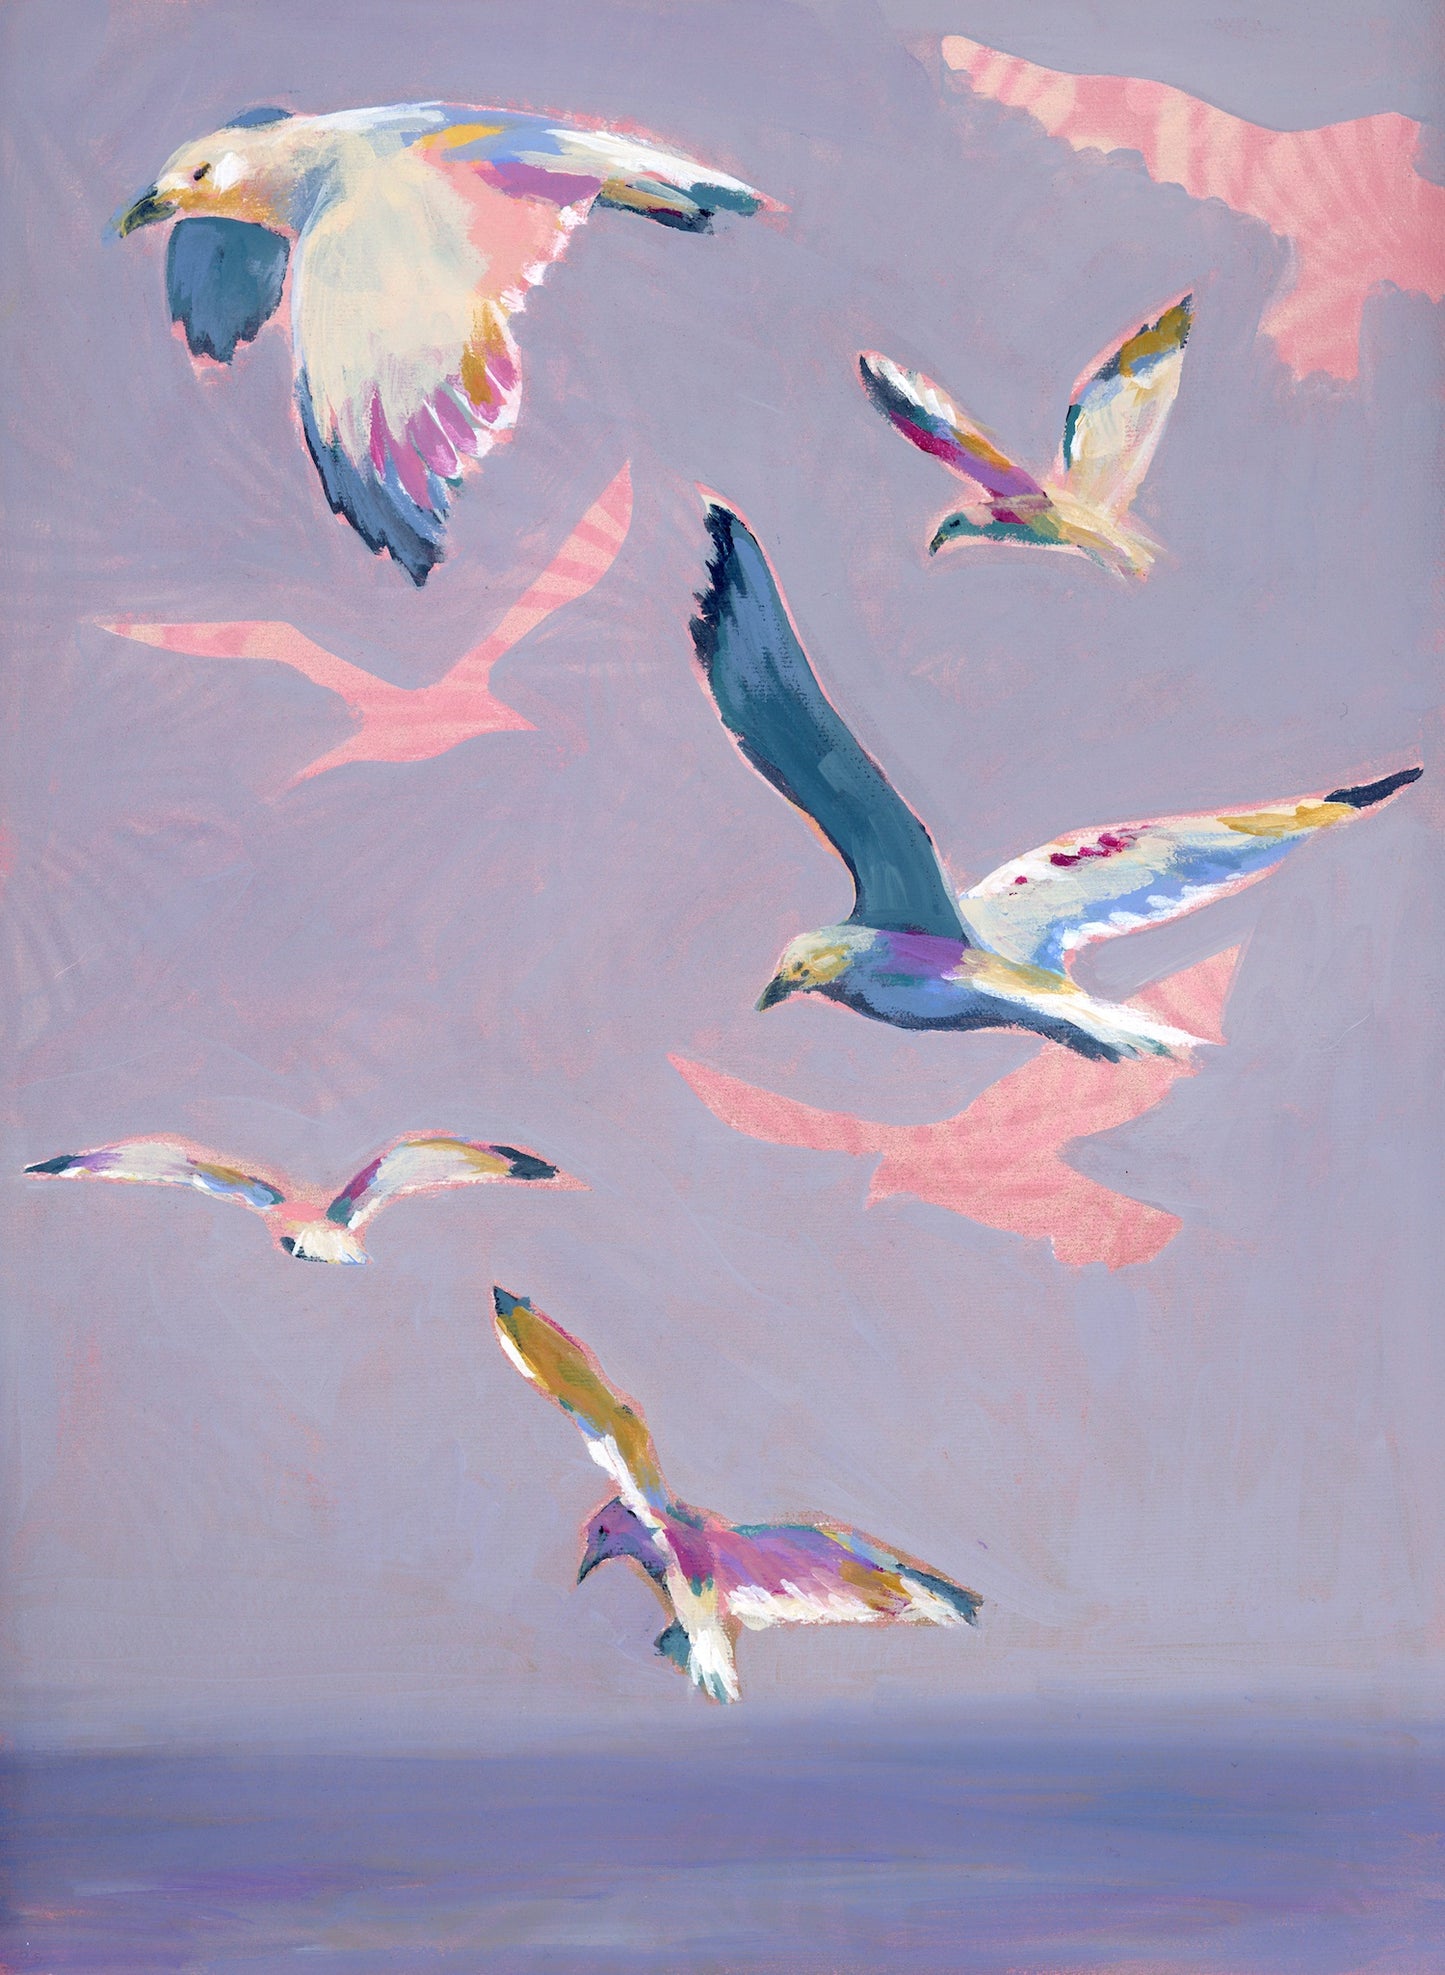 Lavender Gulls | 12x16 | ORIGINAL SPRAY PAINT AND ACRYLIC PAINTING ON CANVAS | 22-49P